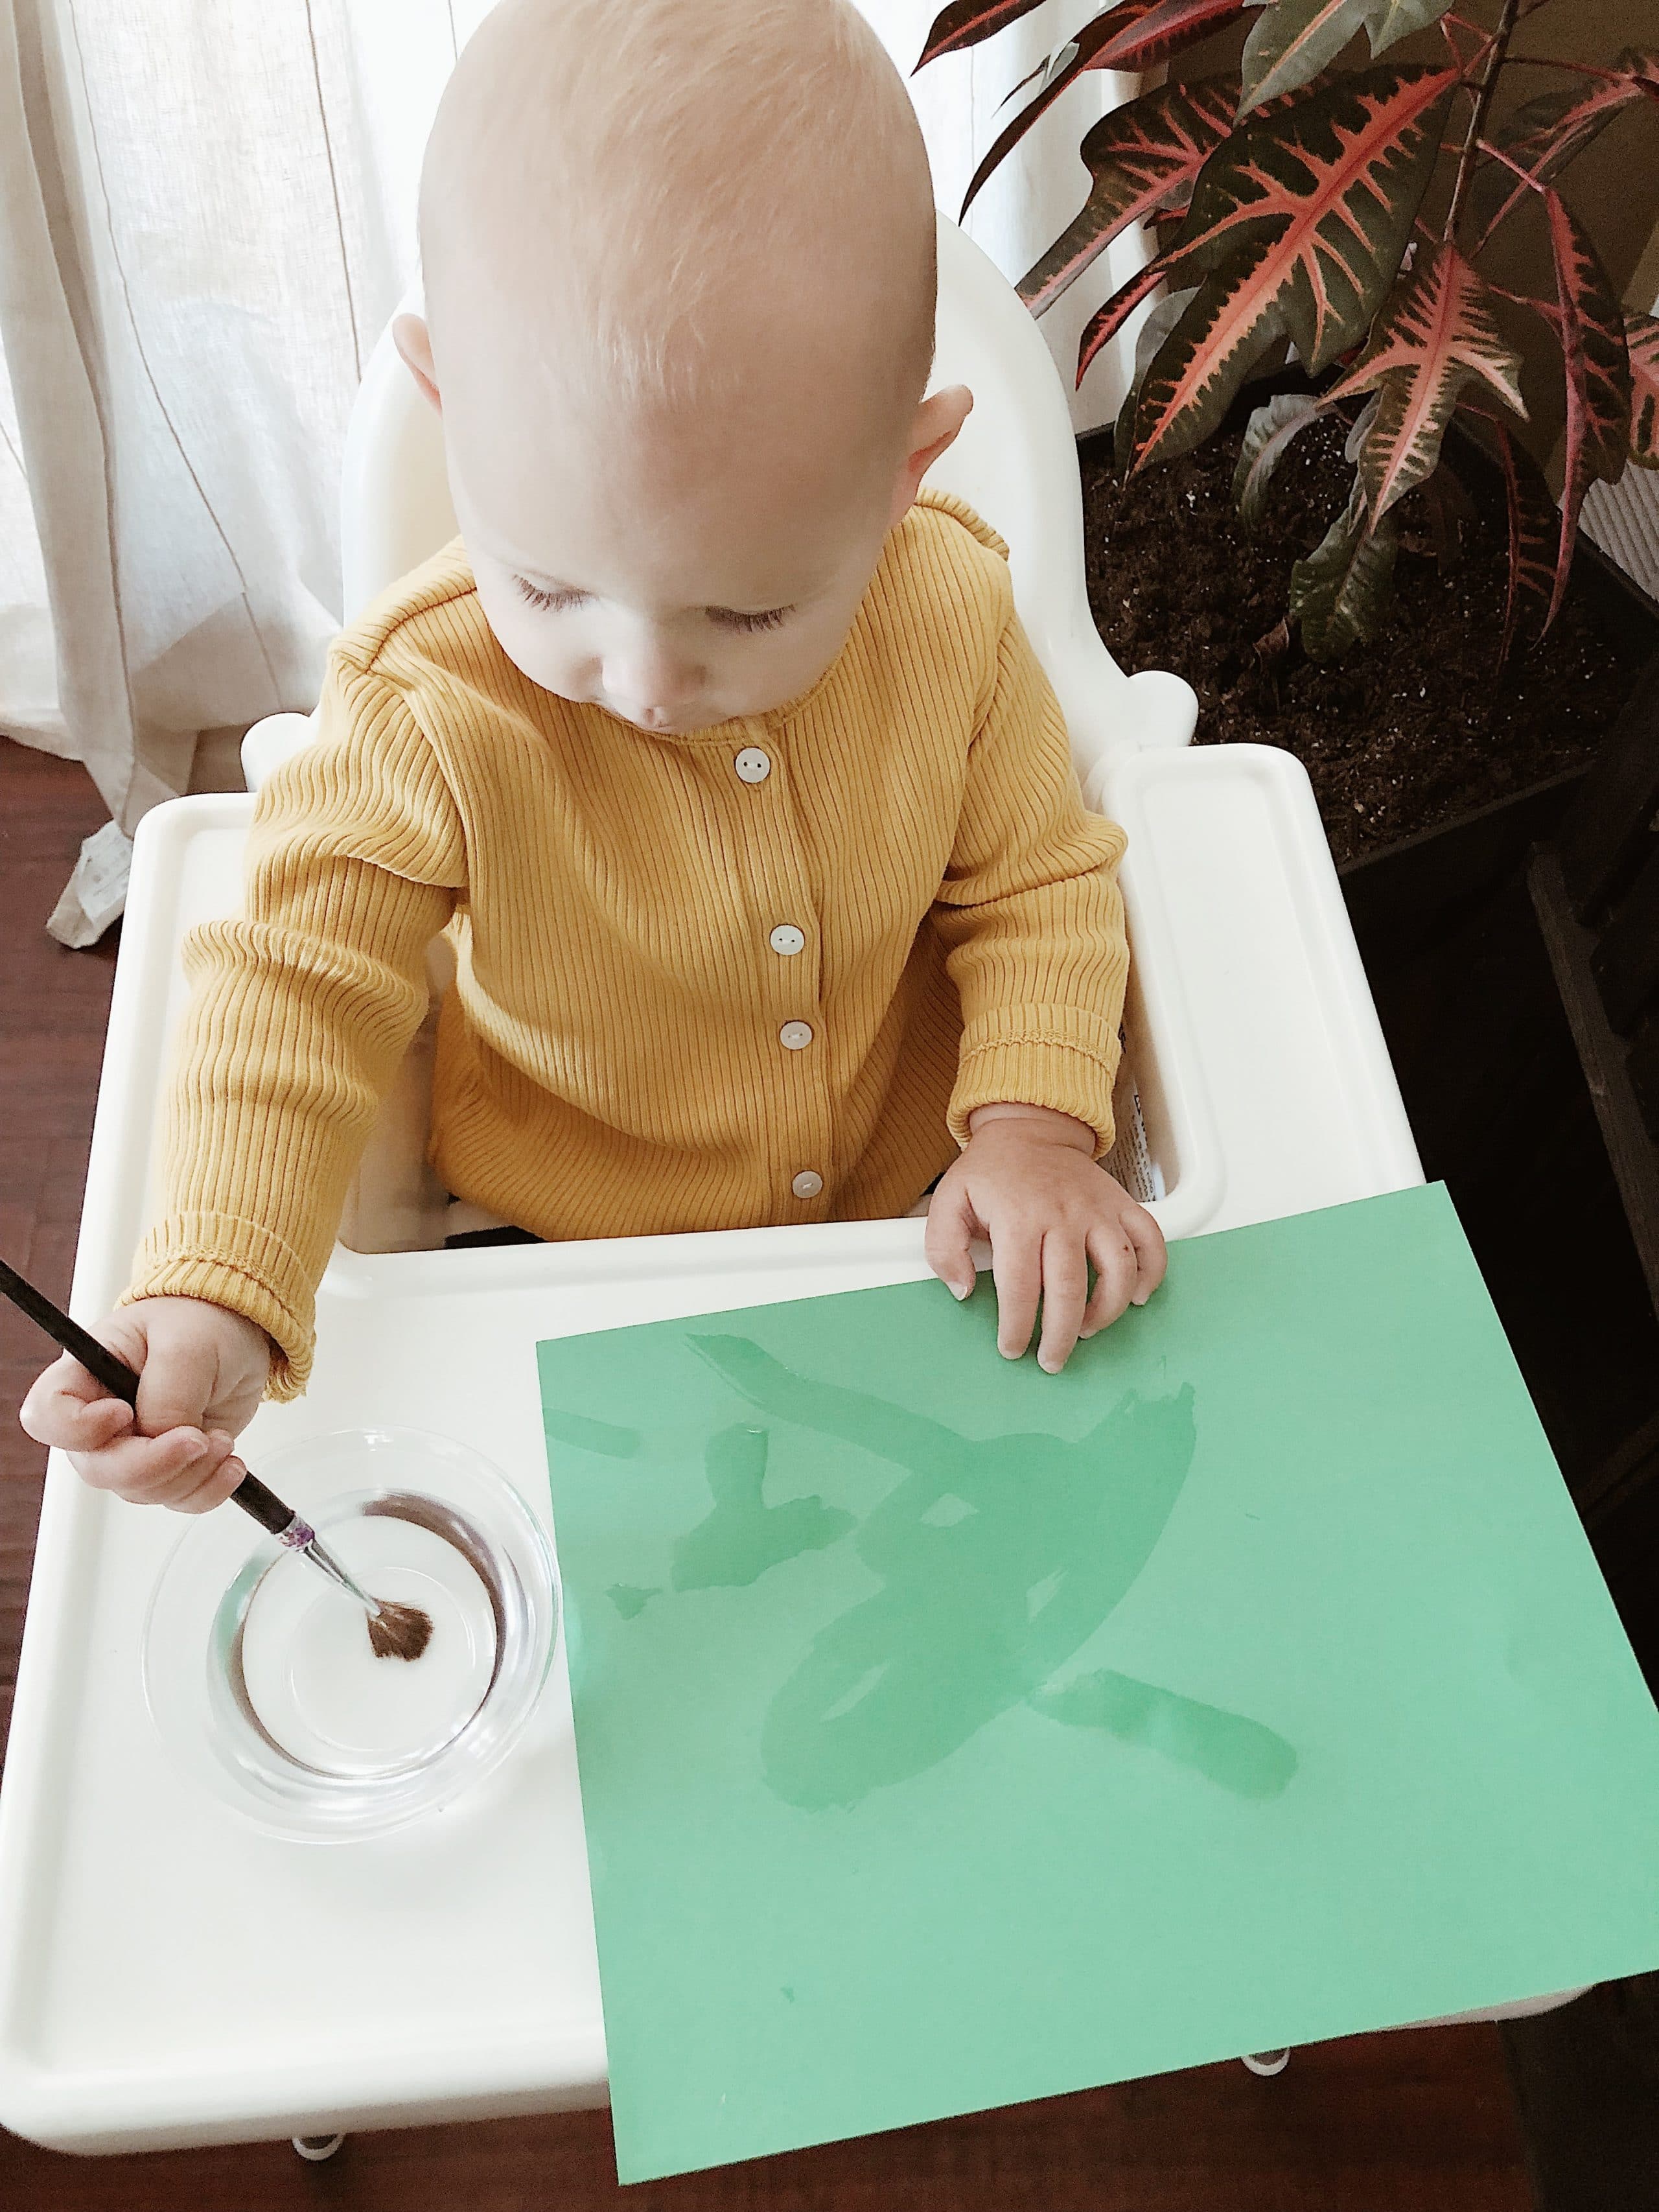 Painting with Water Activity